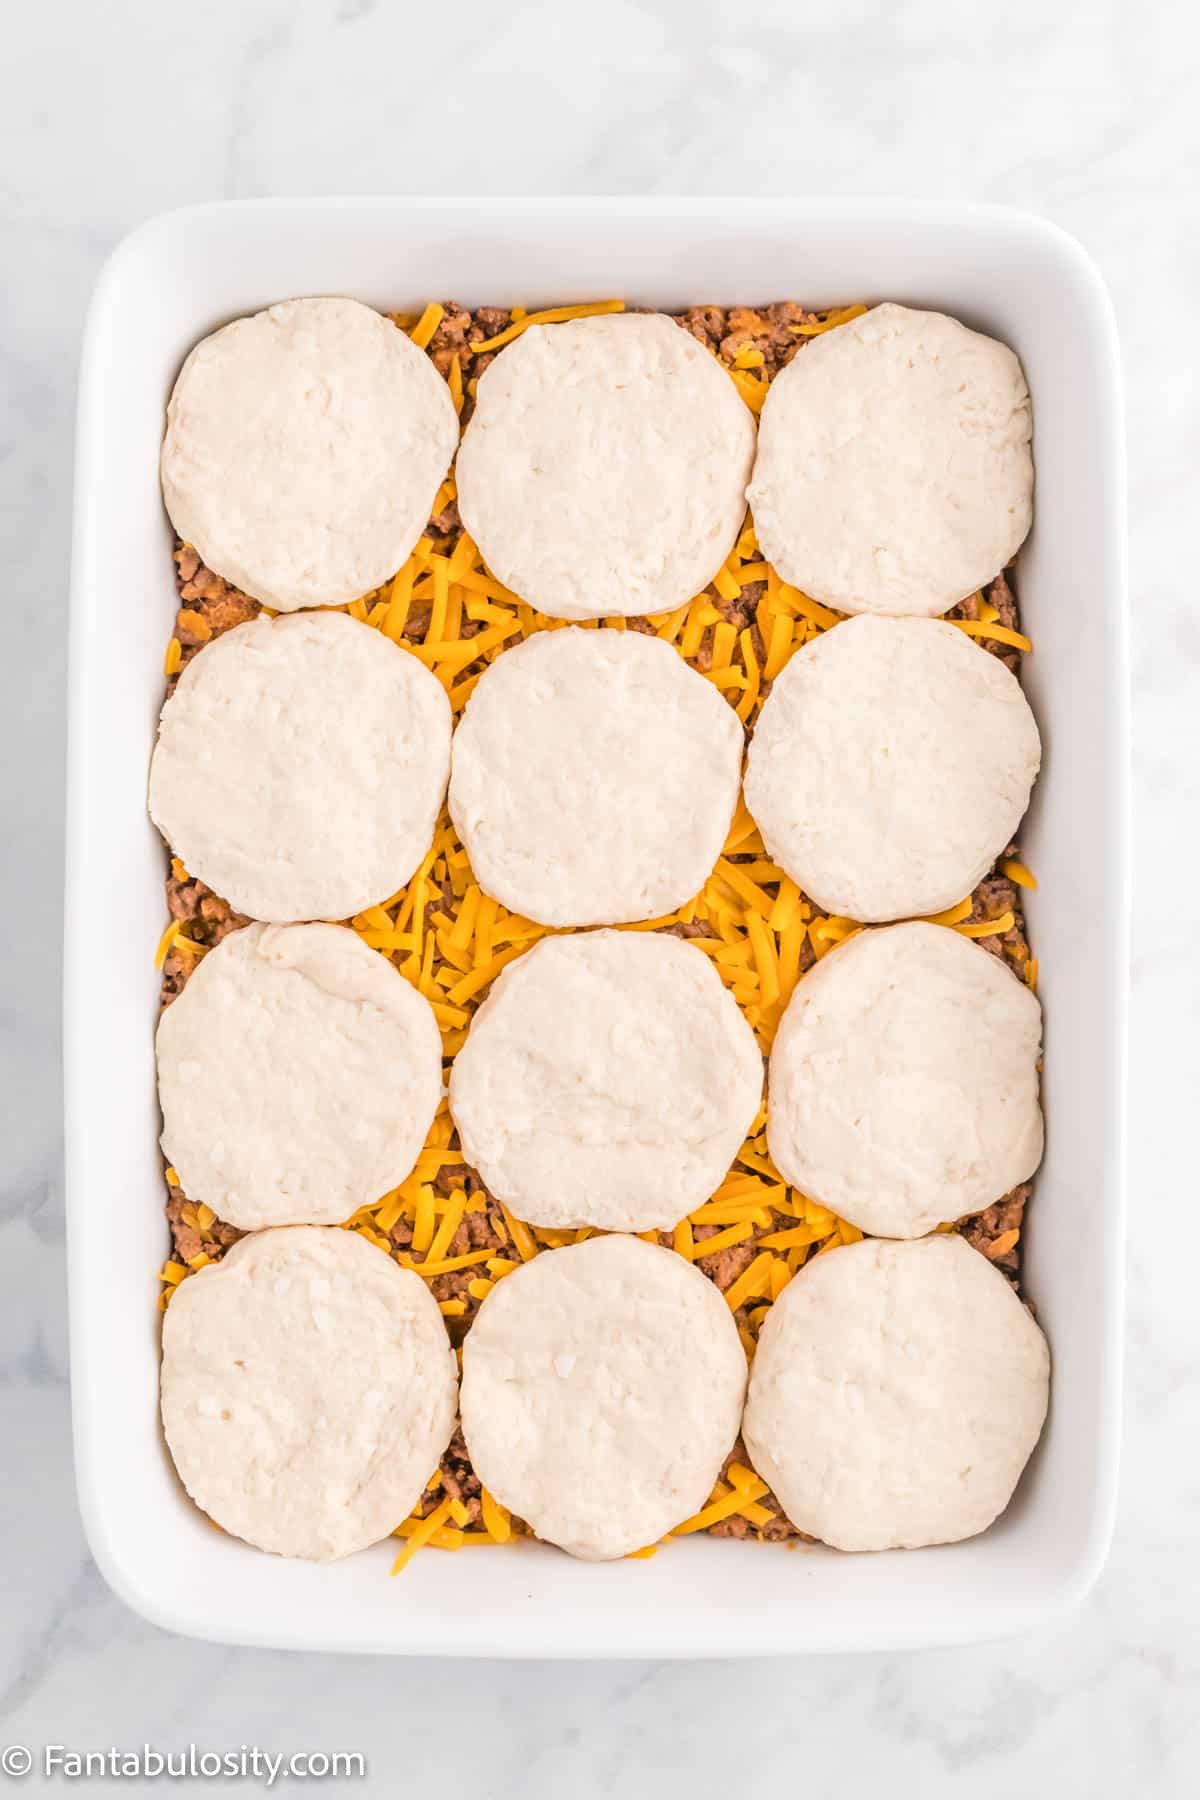 12 biscuits (that have been split in half) layered on top of the casserole.